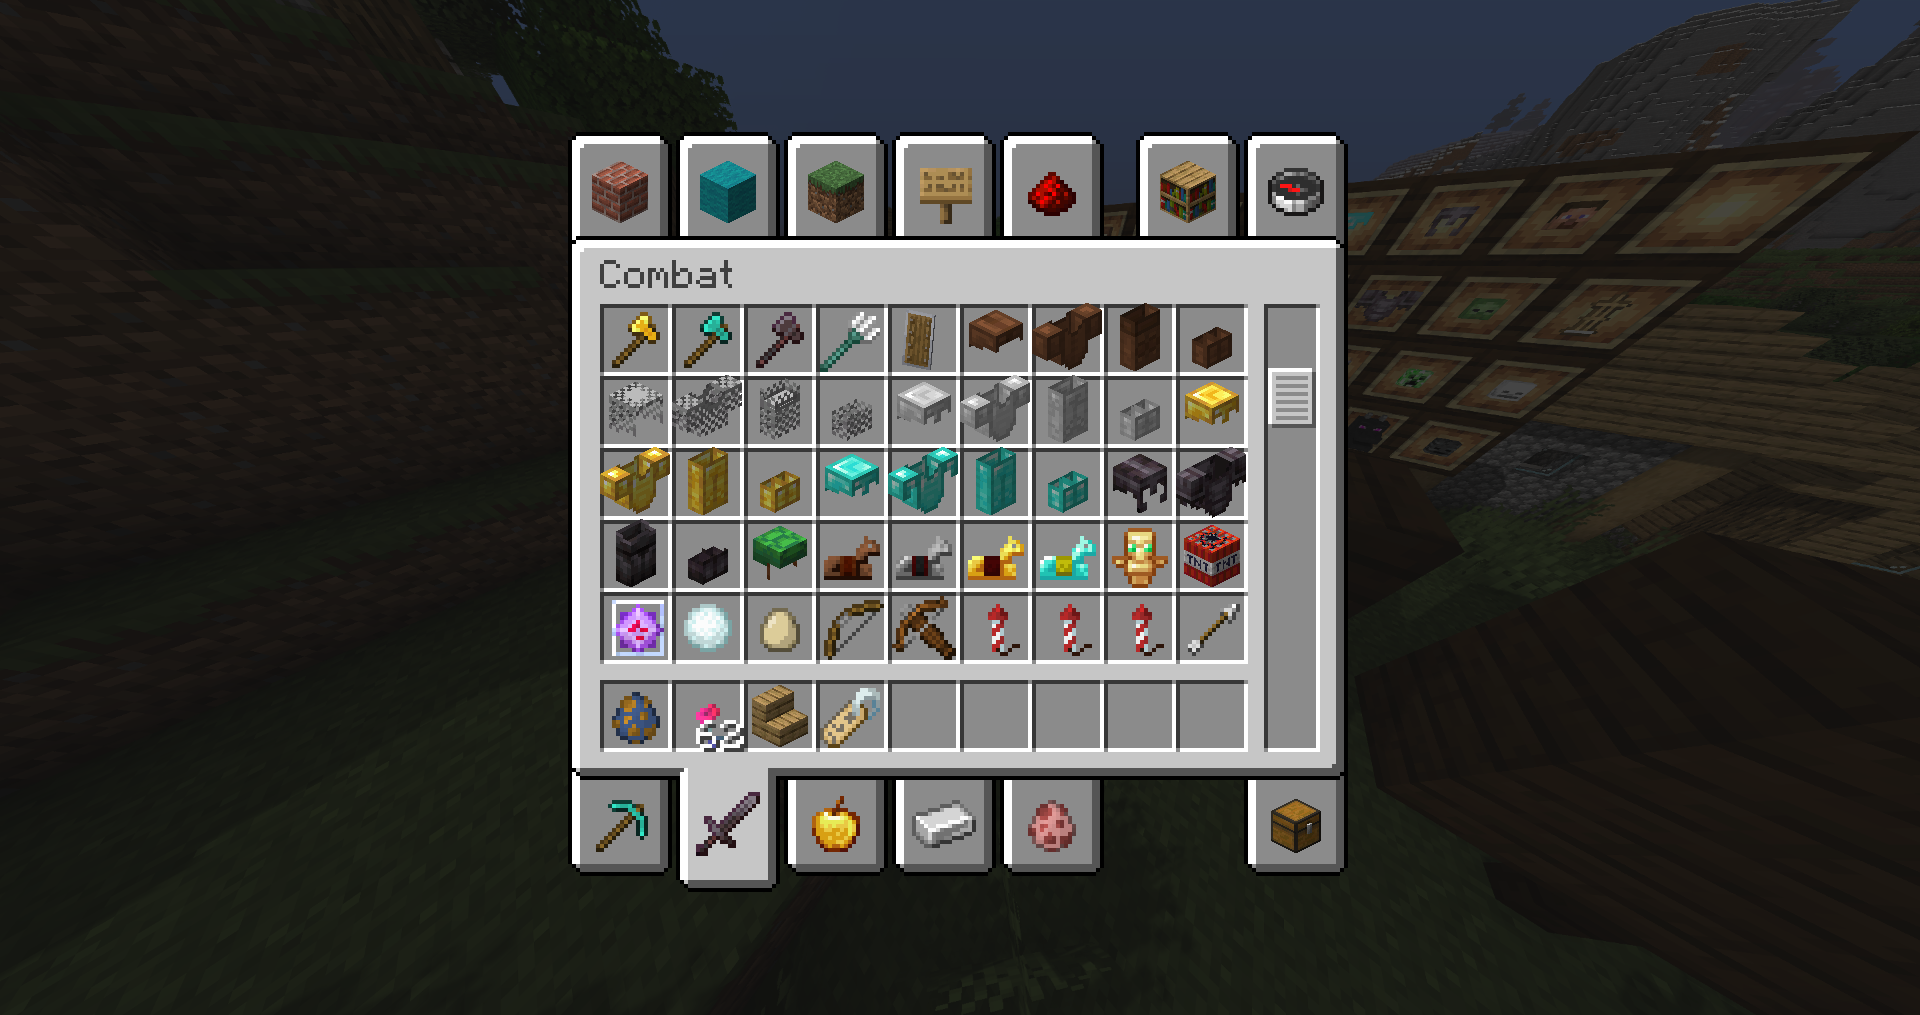 Armor in the Inventory!